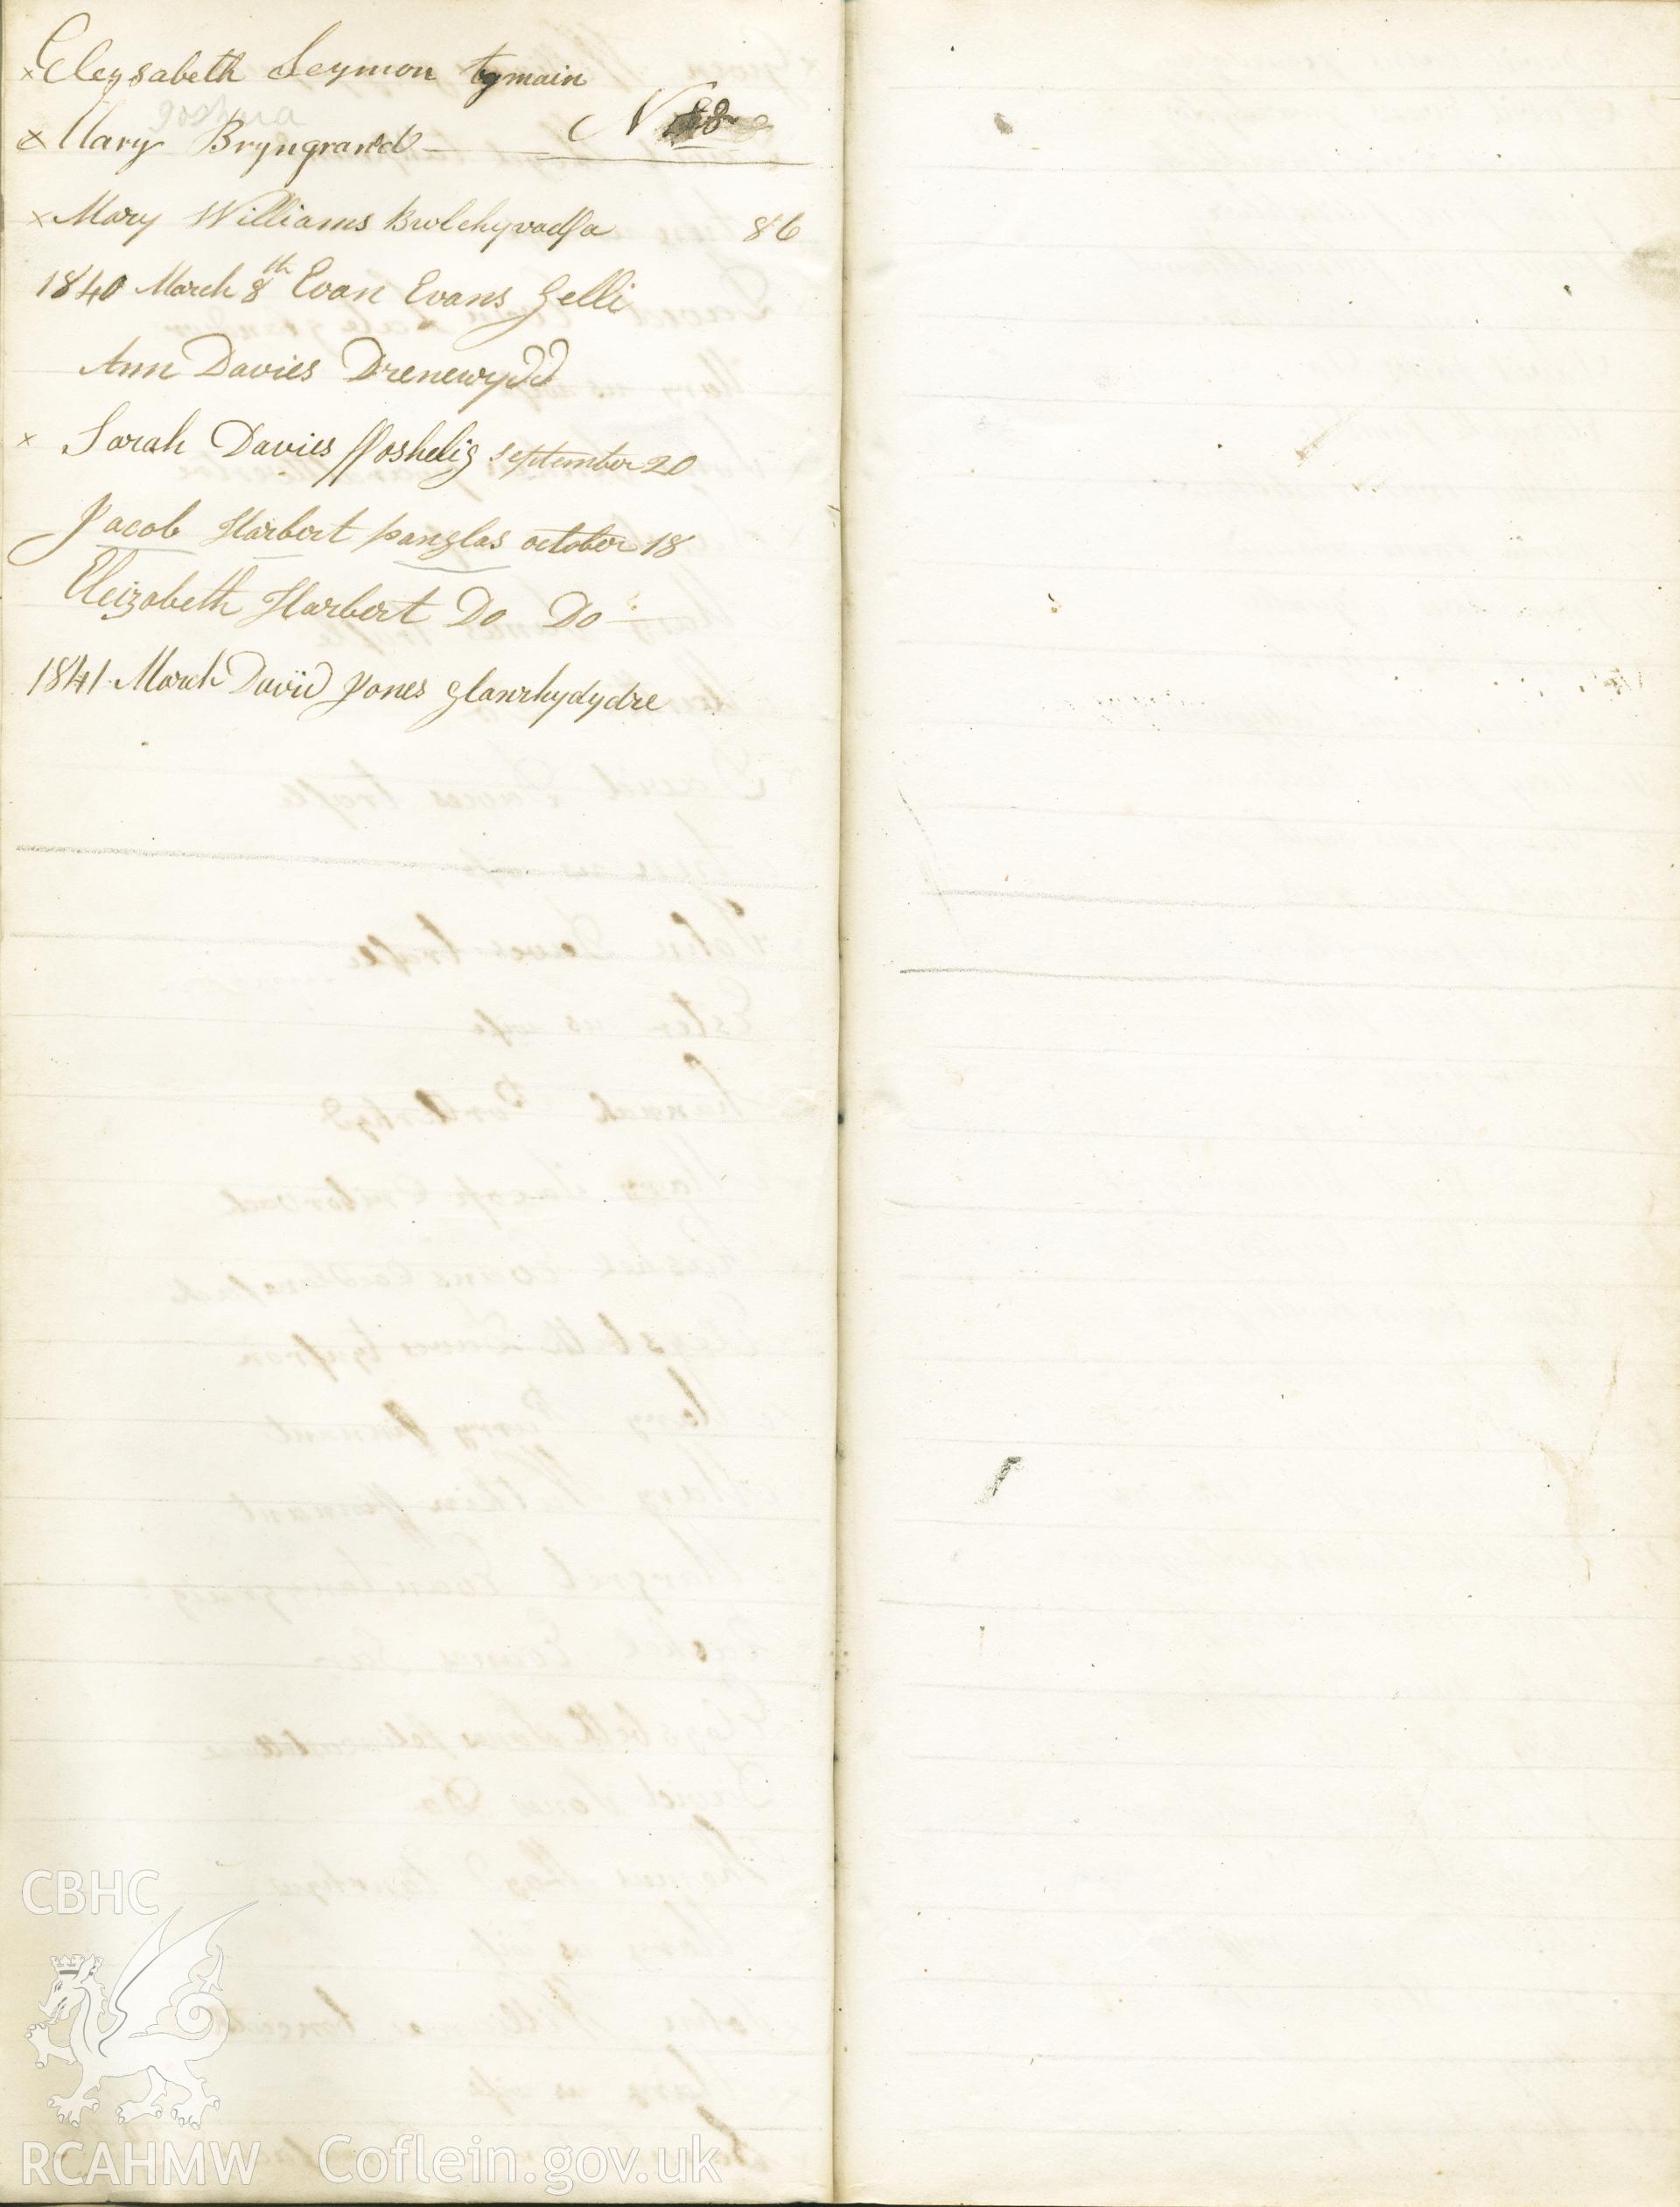 Page from handwritten Subscriber's book for yr Hen Gapel, Rhydowen. Names on this page begin with Elisabeth Beynon tymain and end with 1841 March David Jones Glanrhydydre. Donated to the RCAHMW as part of the Digital Dissent Project.